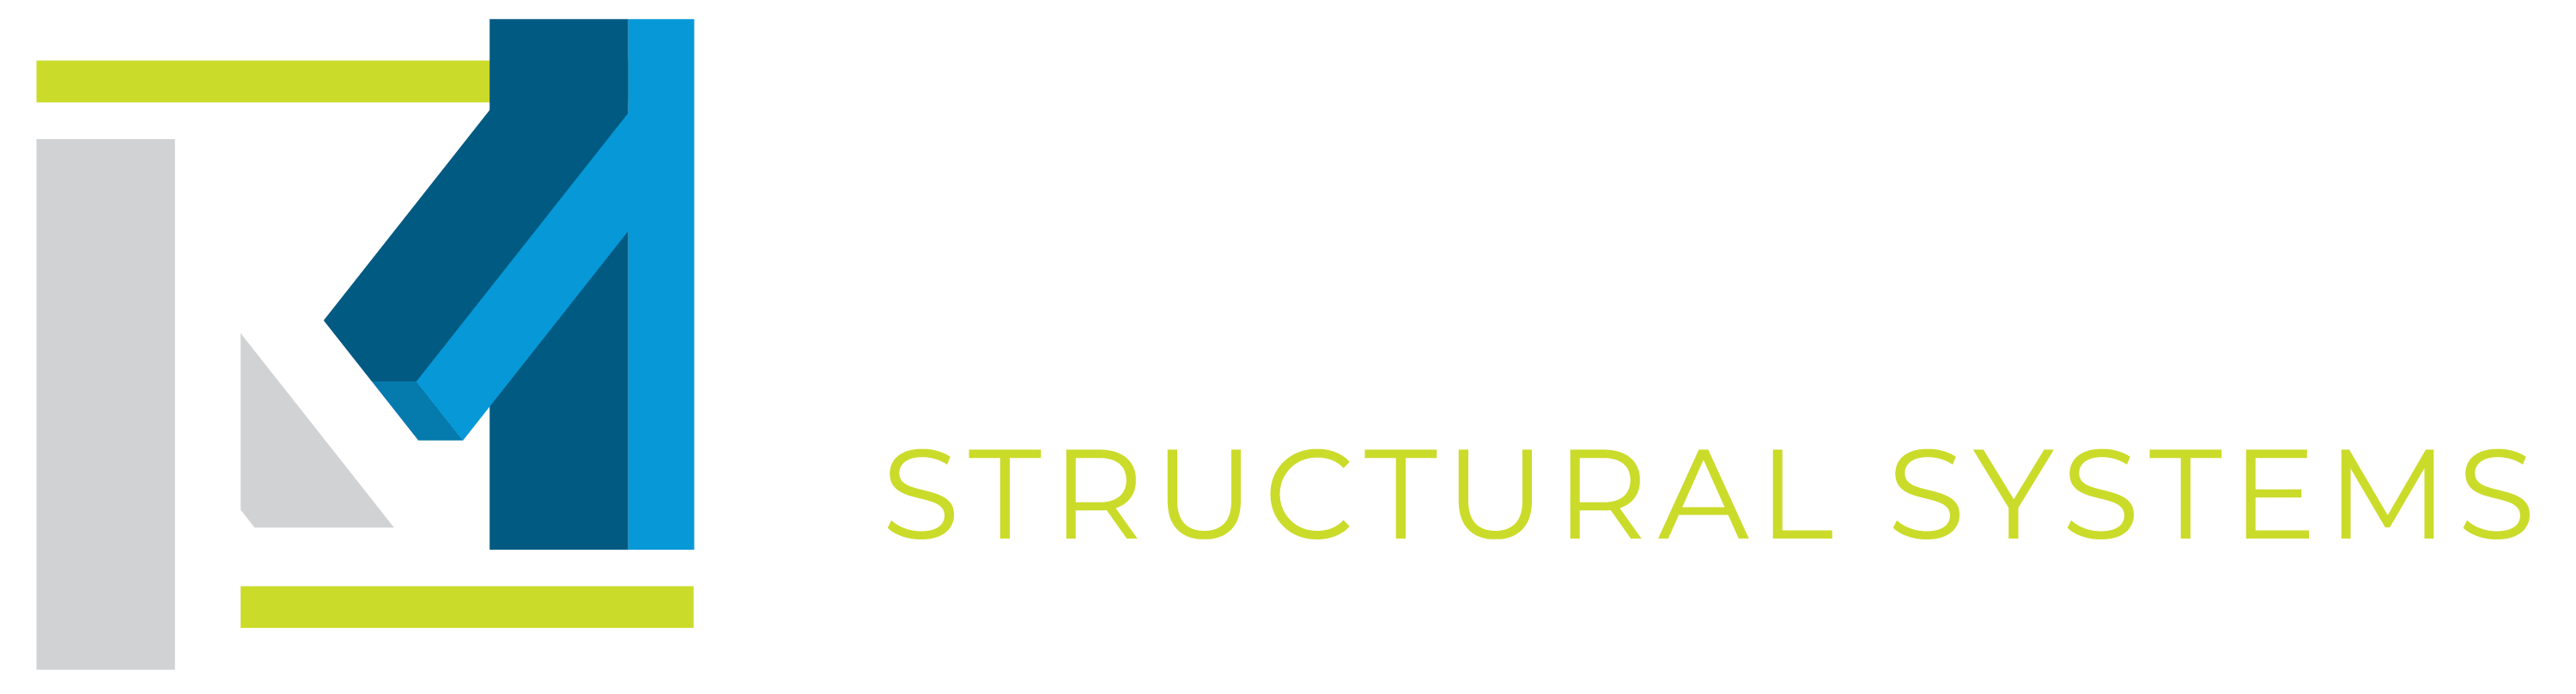 Modern Structural Systems